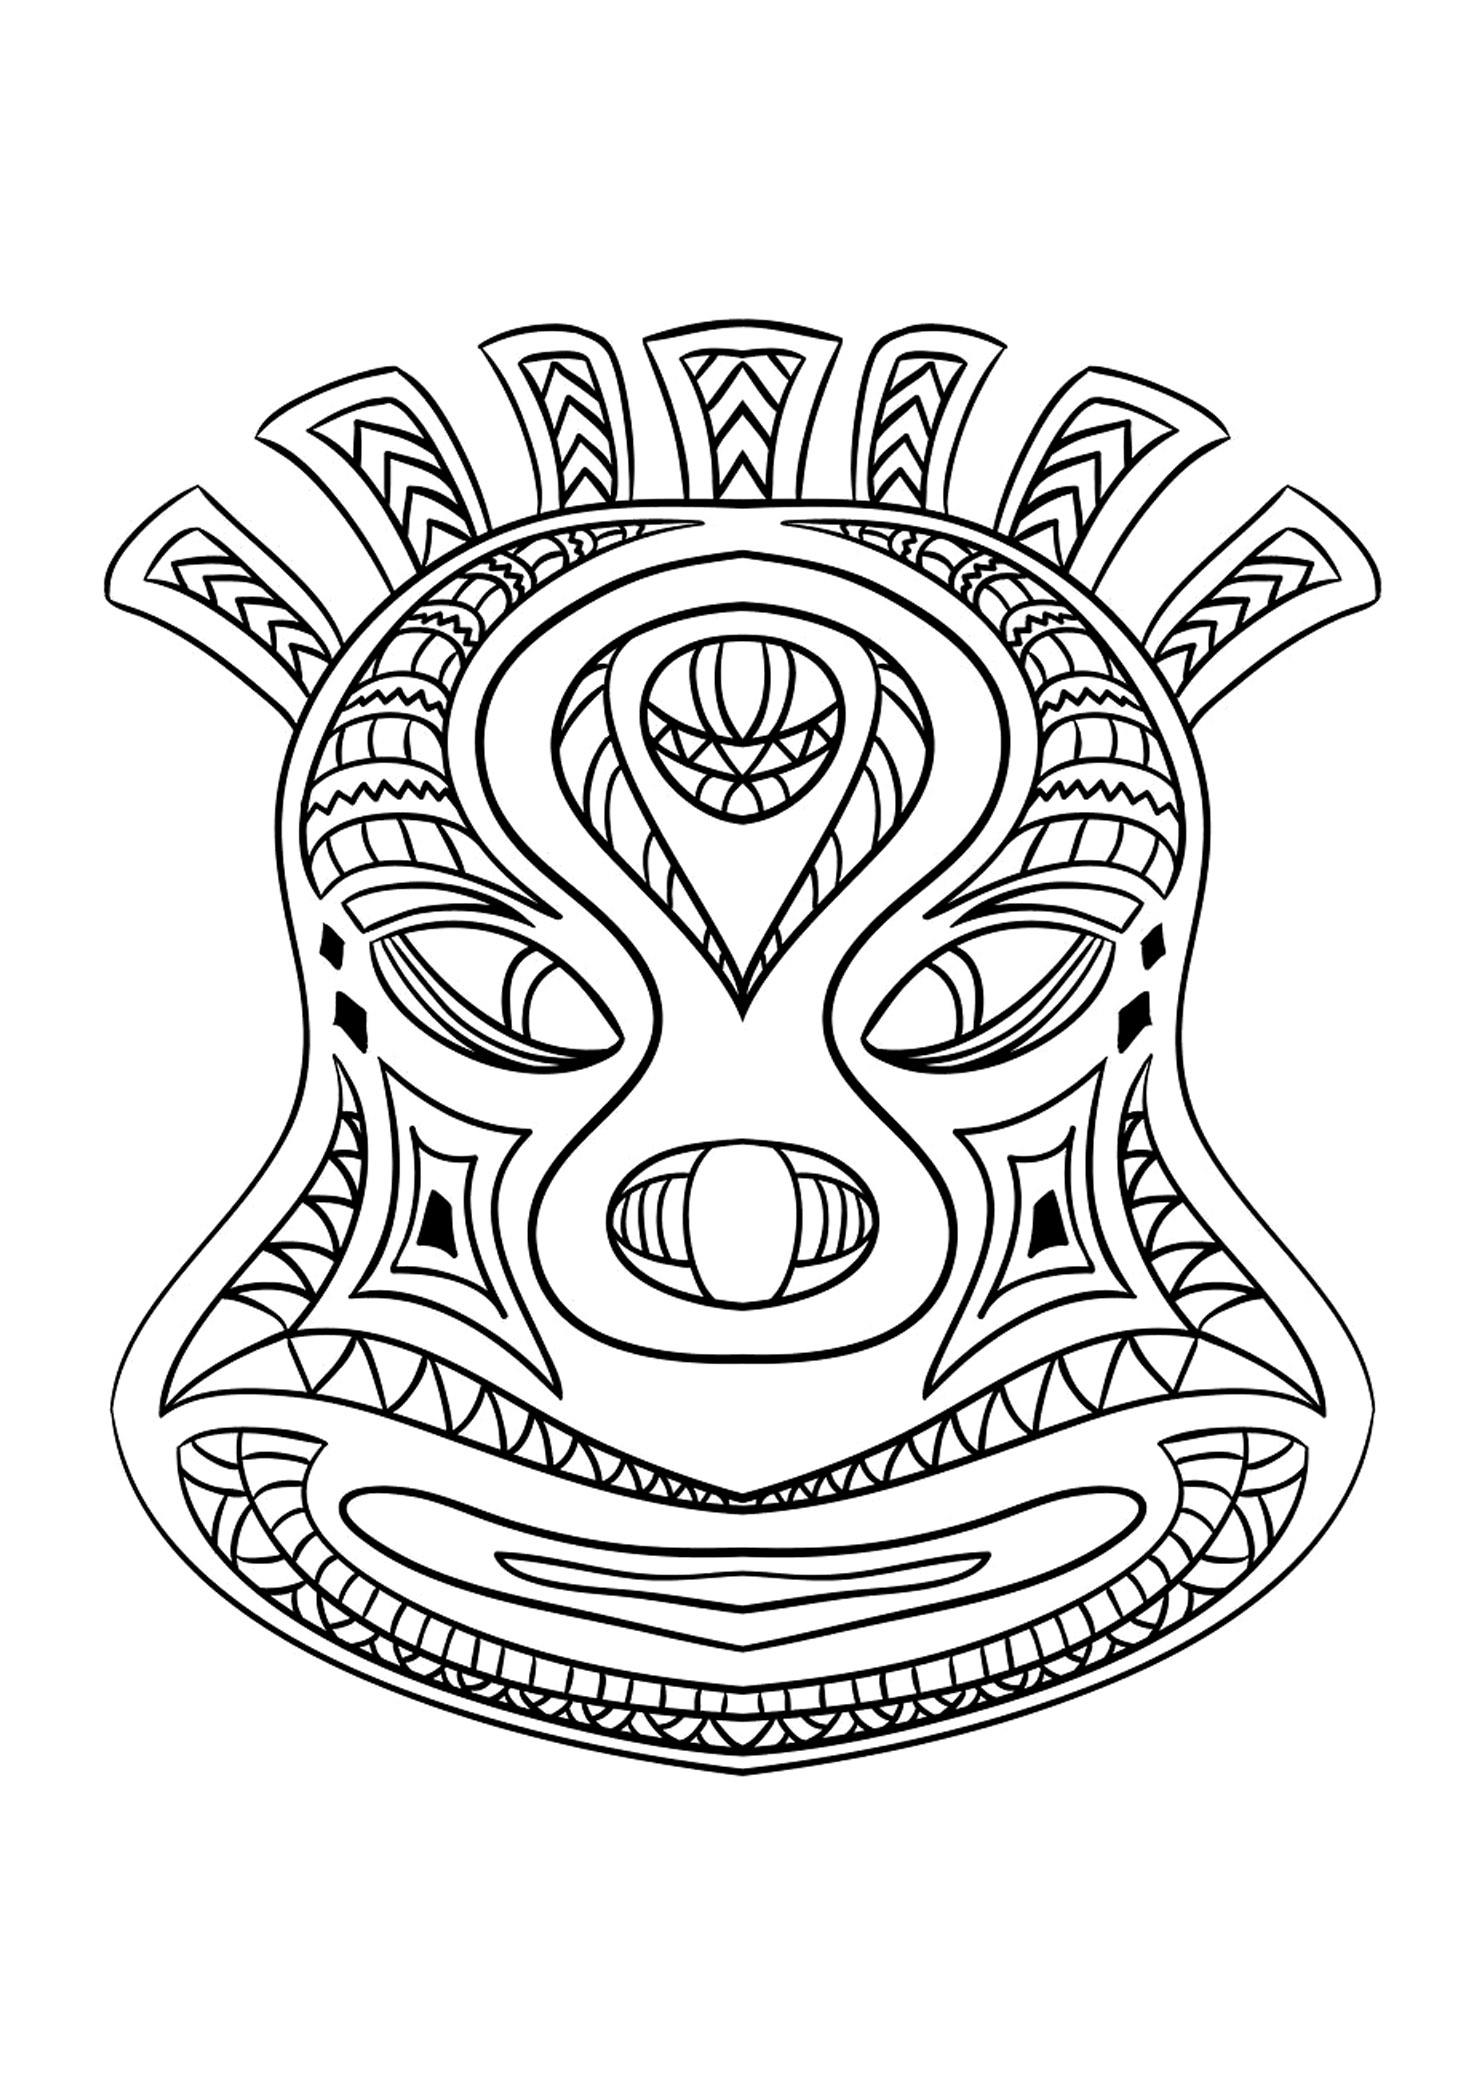 Coloring picture of an African mask - 2